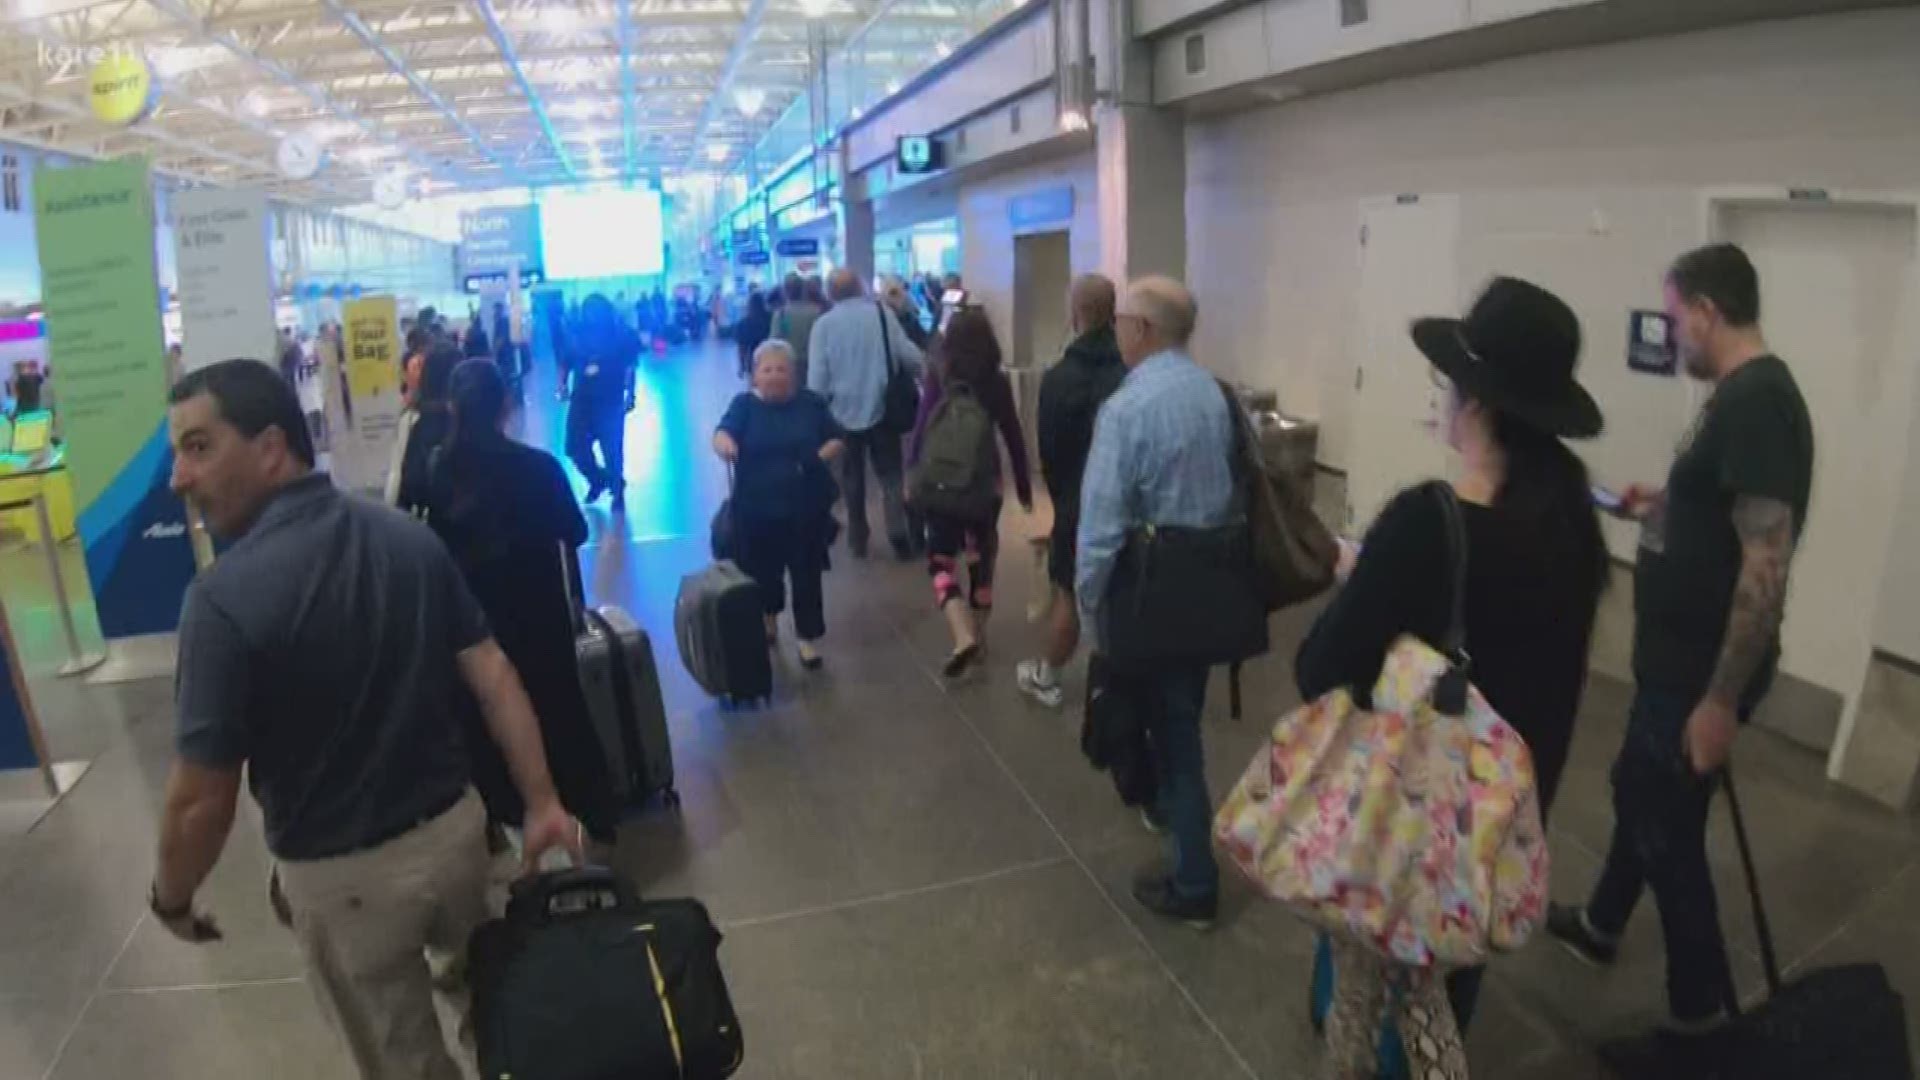 TSA expects 4% more travelers will go through MSP Airport this year, compared to MEA weekend last year.